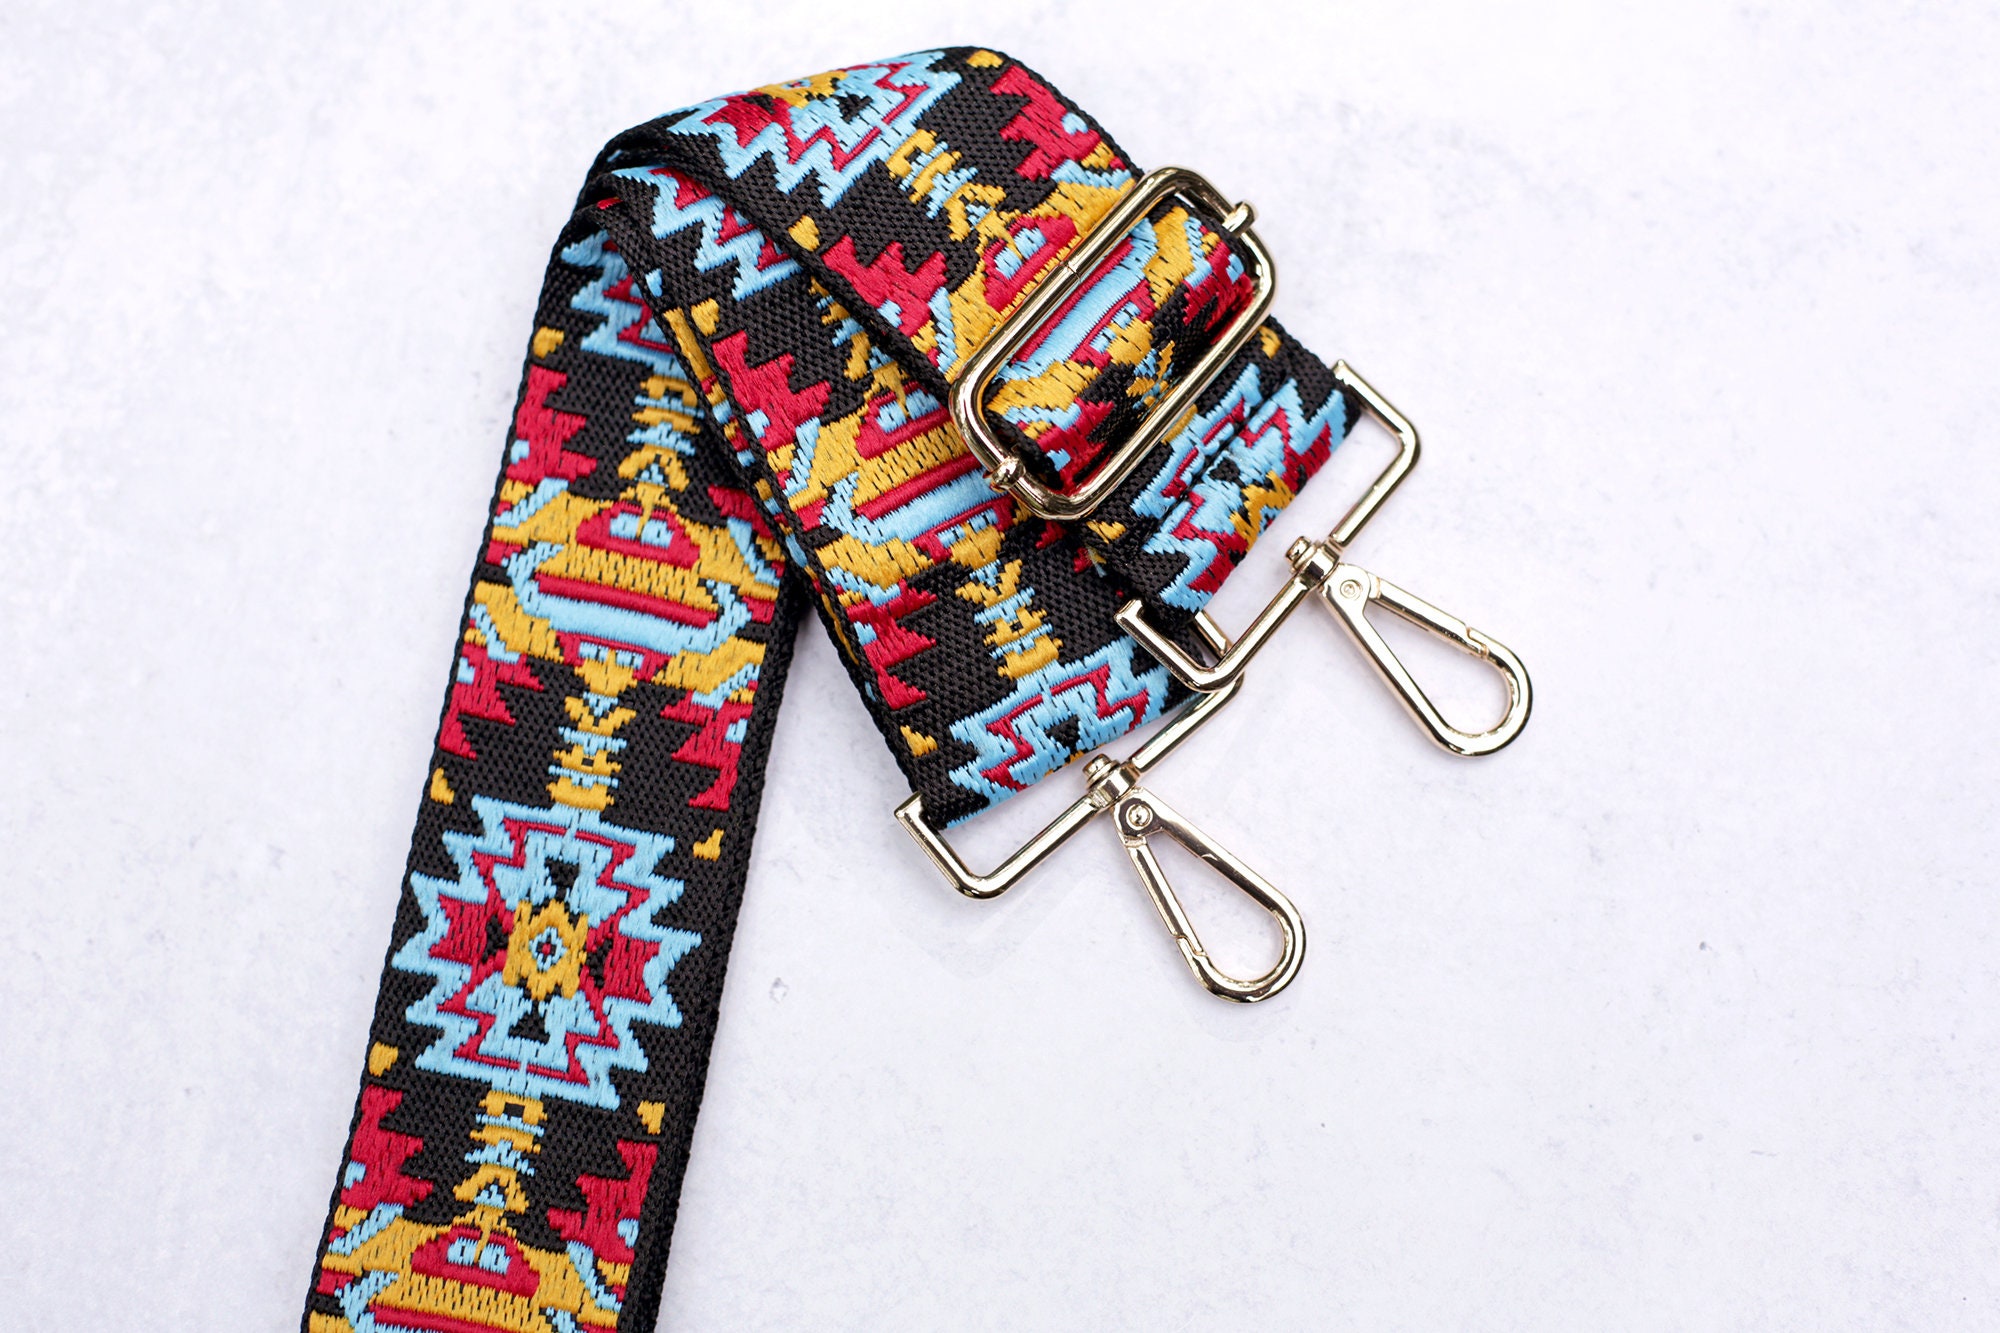 White Beaded Purse Strap, Native Bag Strap, Tribal Phone Lanyard, Wide  Phone Strap, Crossbody Strap, Luggage Replacement Shoulder Strap 